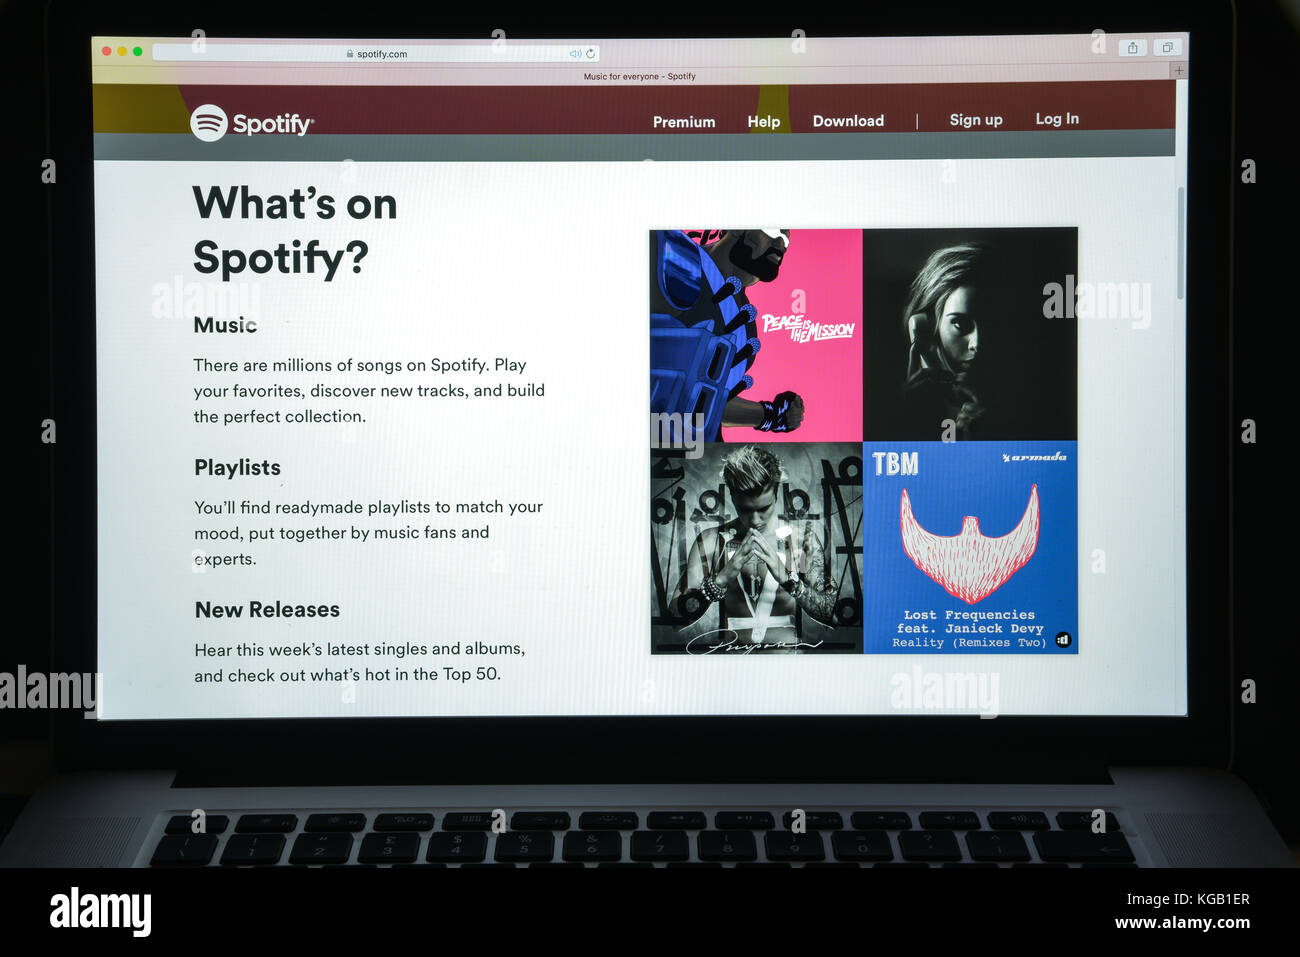 Milan, Italy - August 10, 2017: Spotify website homepage. It is a music, podcast, and video streaming service. Spotify logo visible. Stock Photo